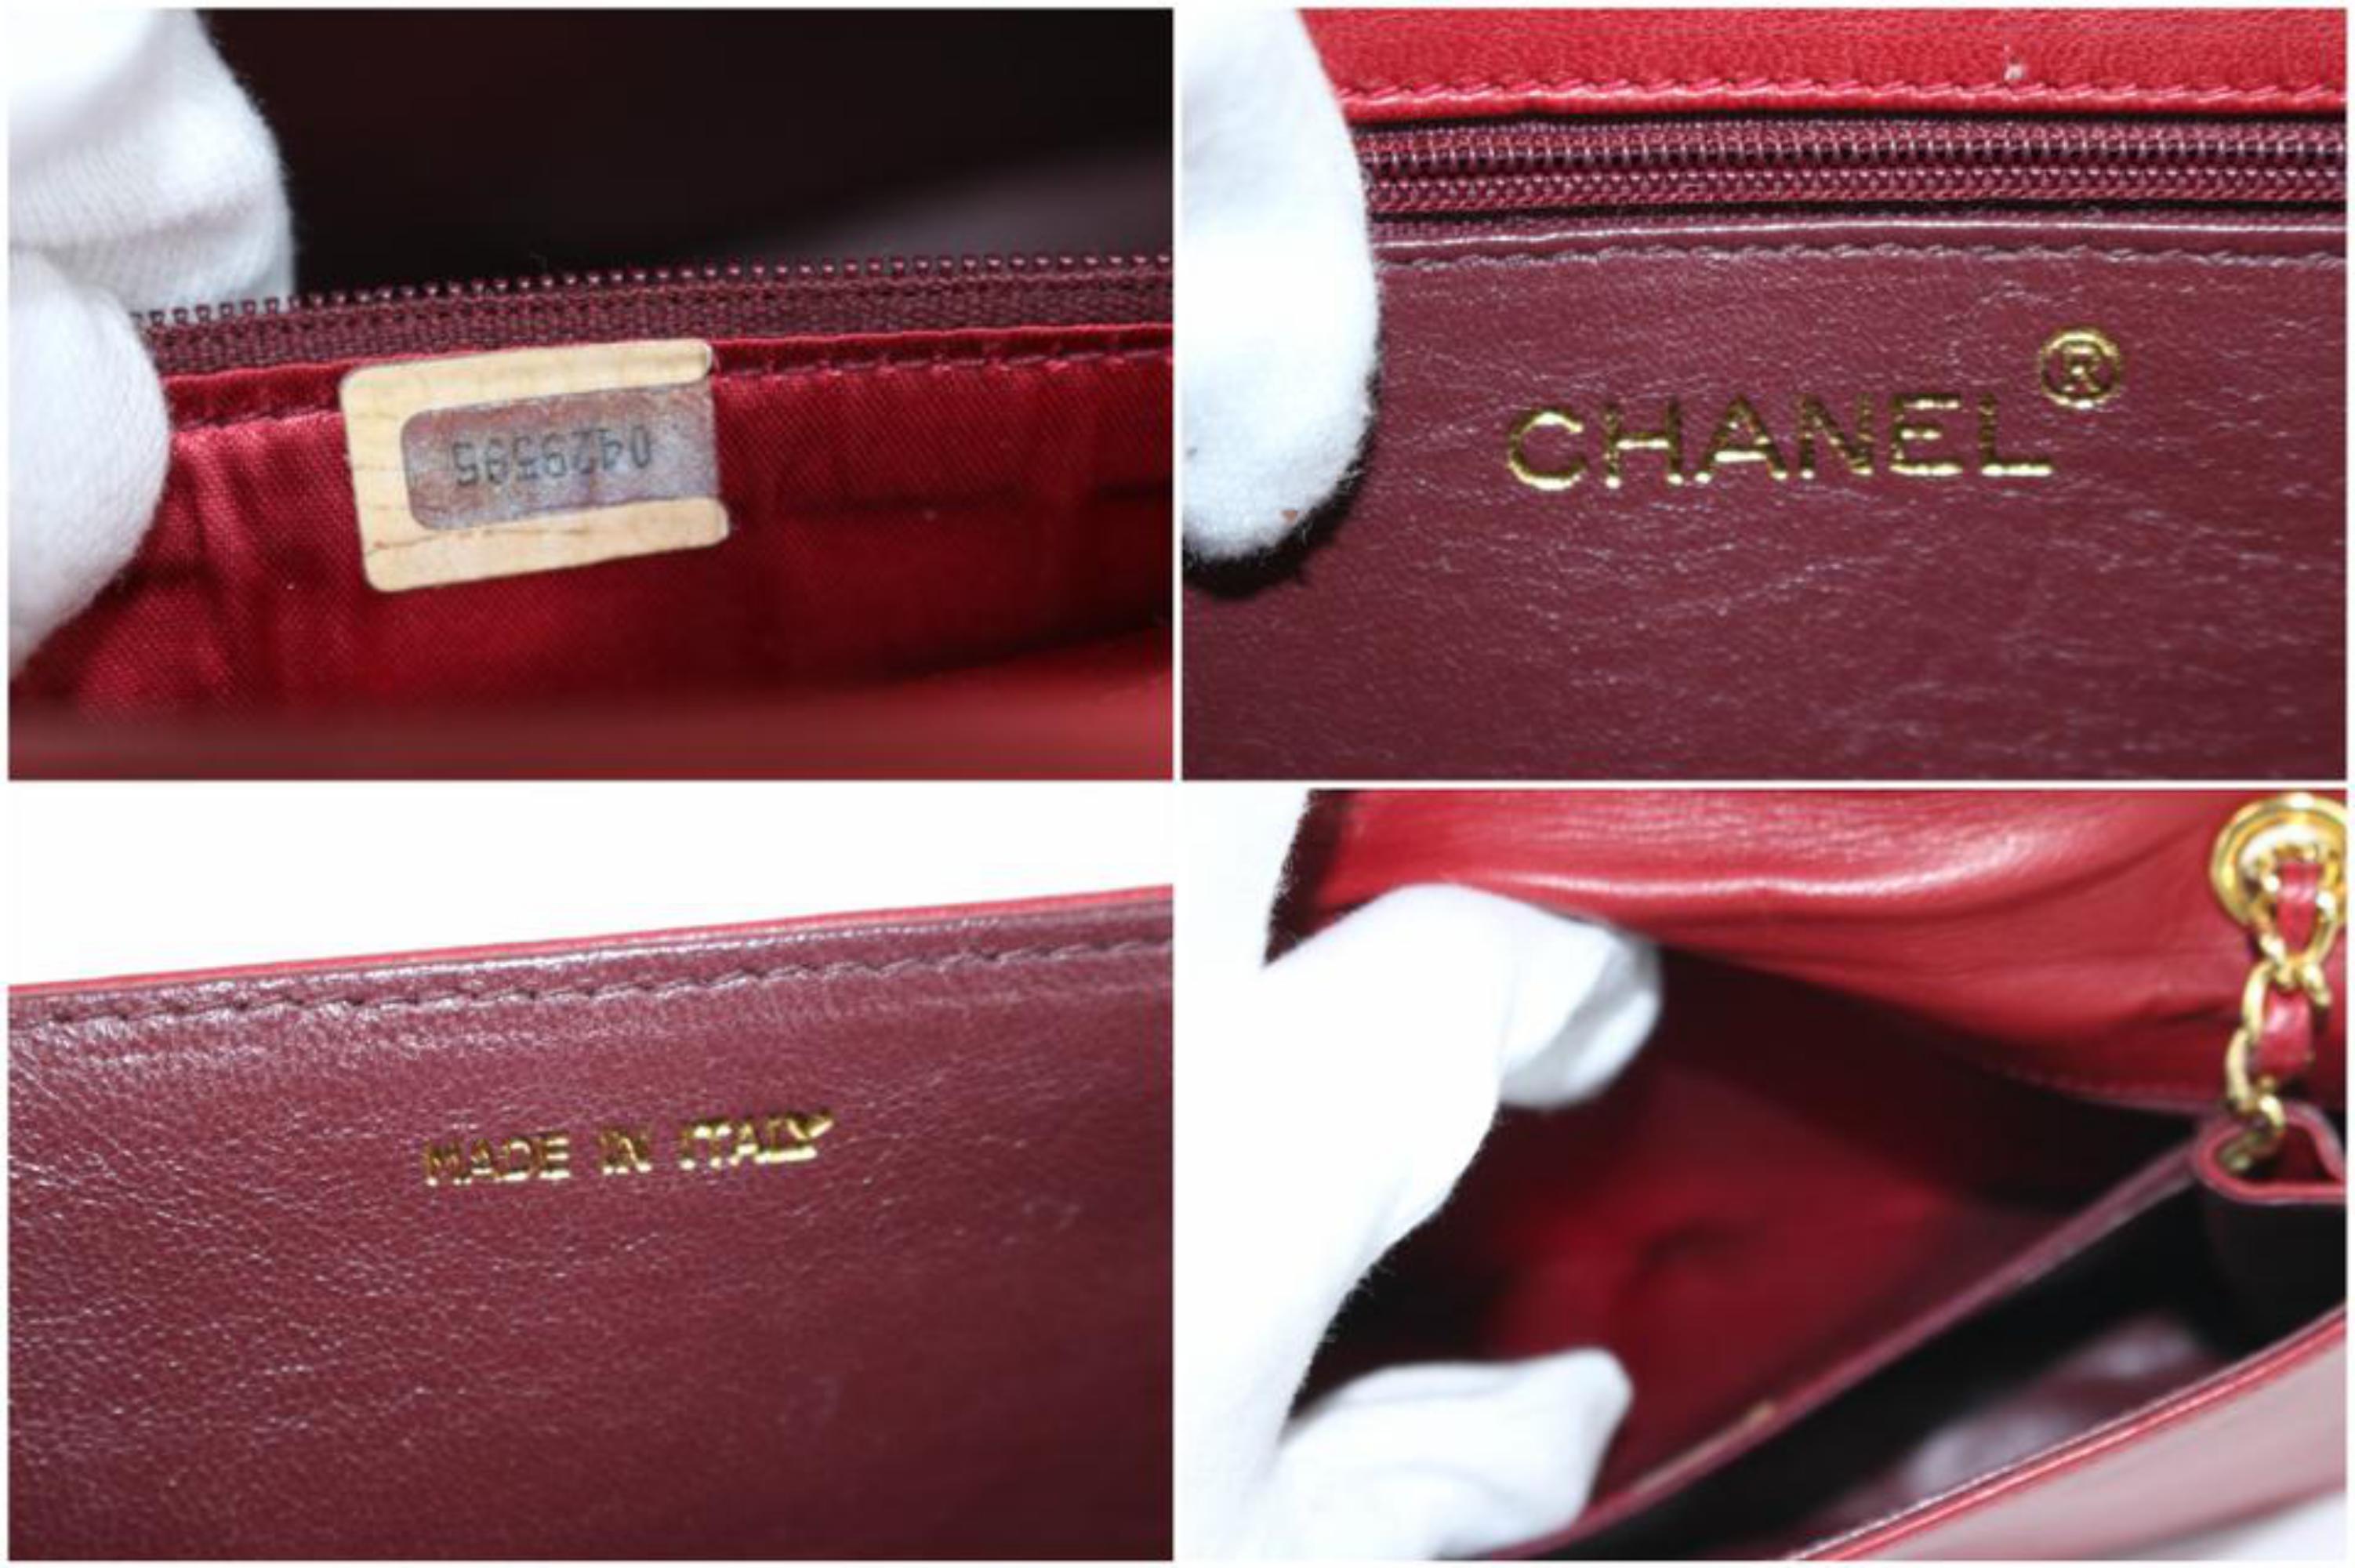 Chanel Brick Flap 05cz0717 Red Lambskin Shoulder Bag In Good Condition For Sale In Forest Hills, NY